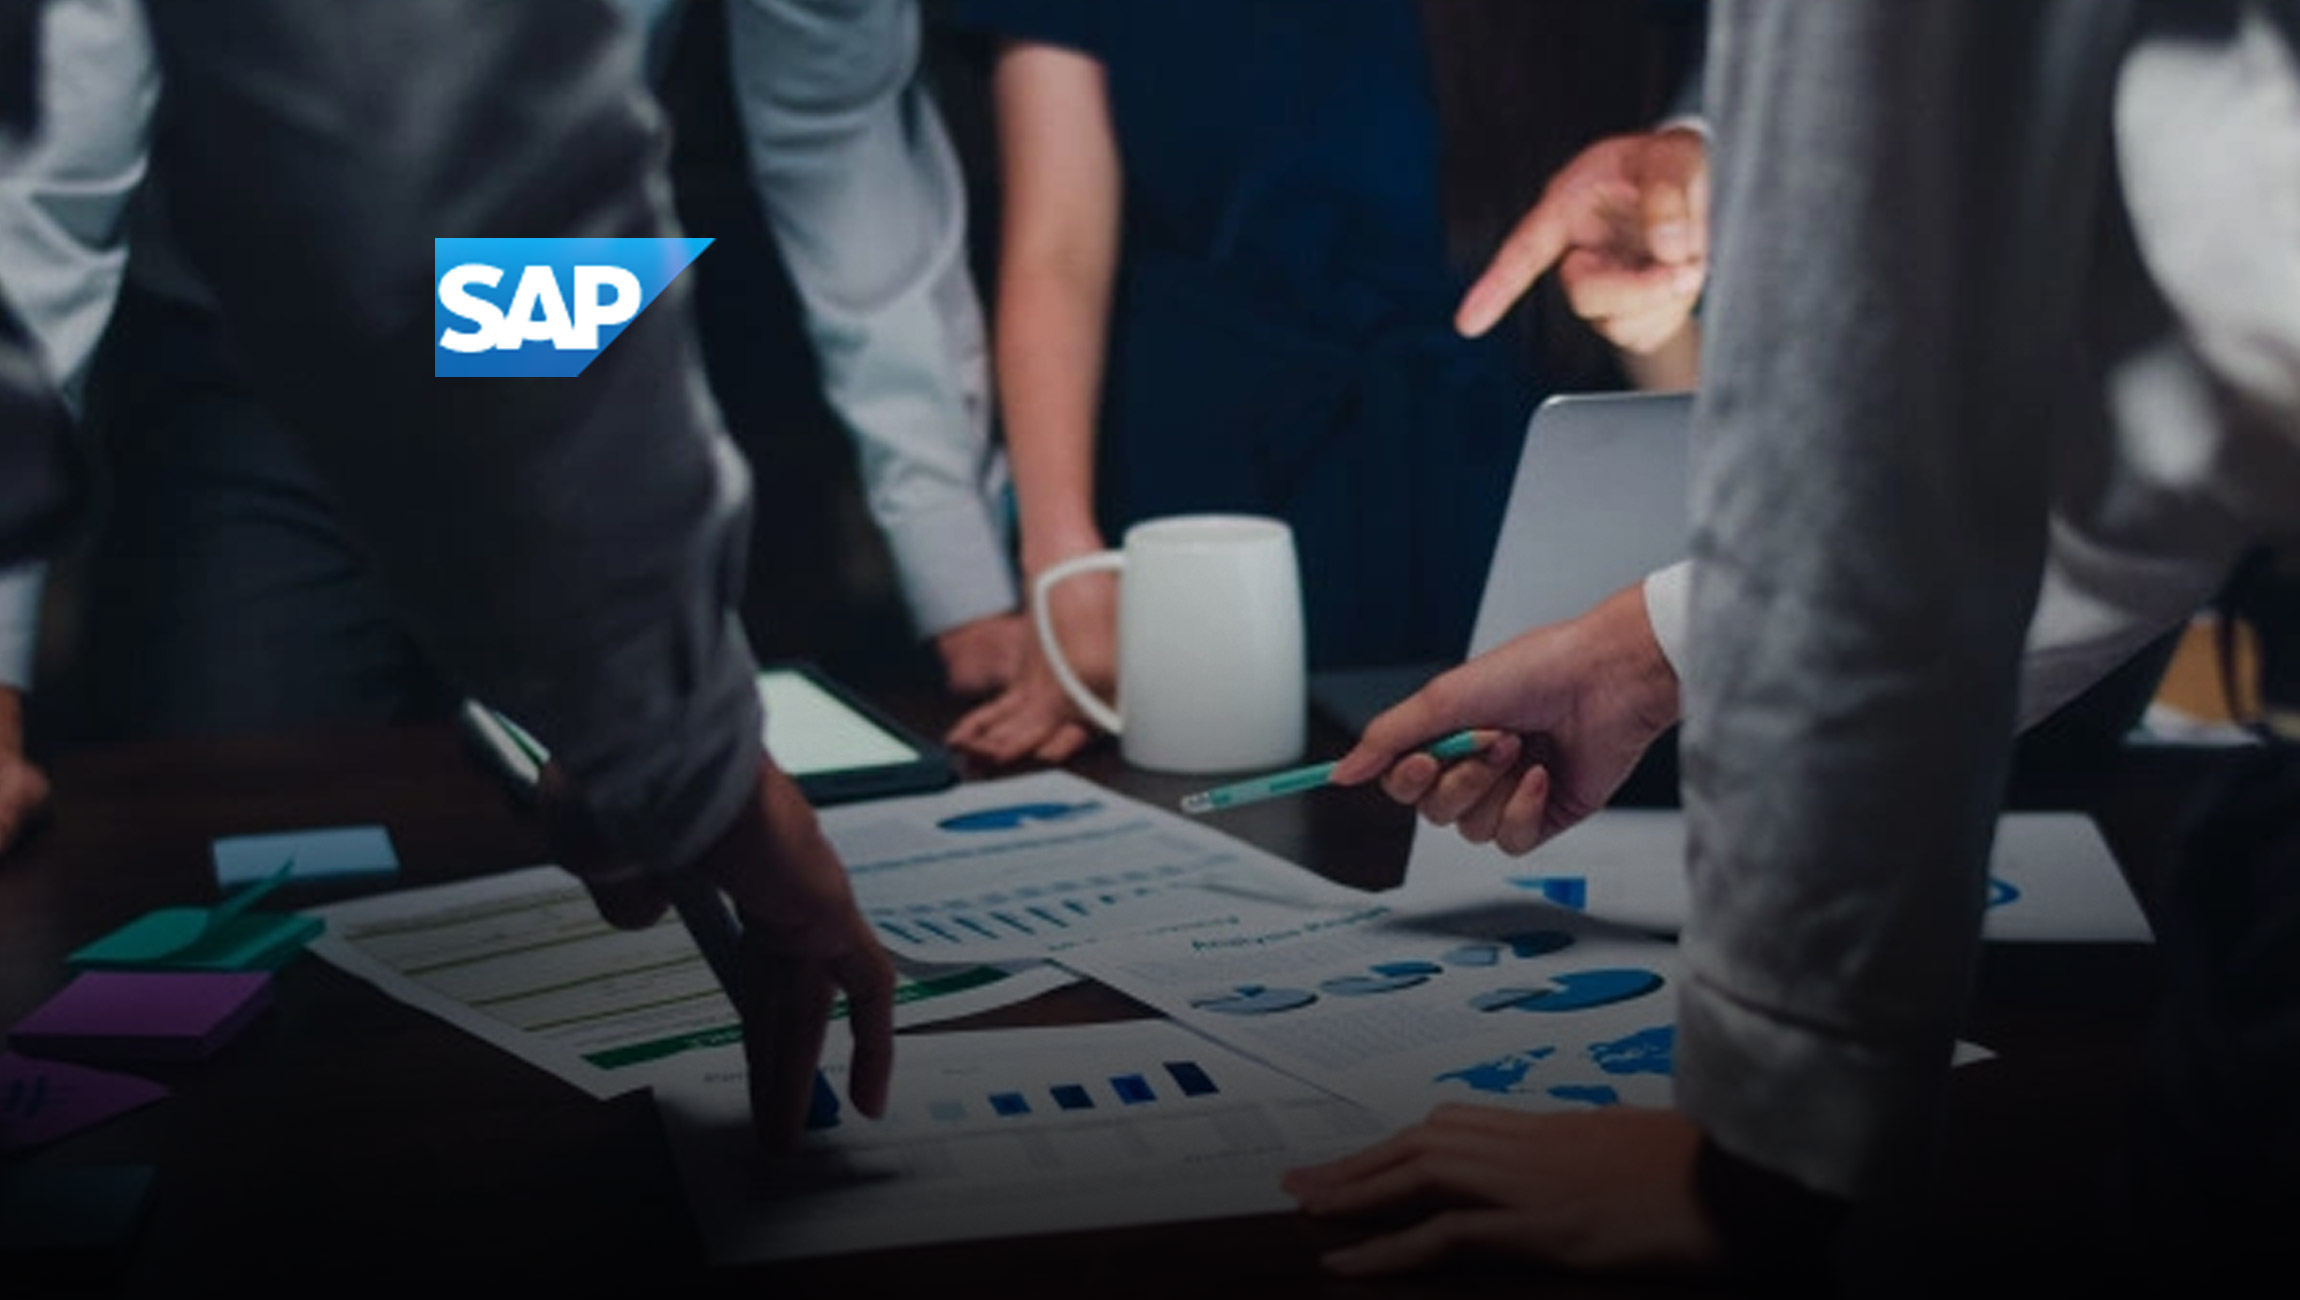 Where Does the Money Go? SAP and Oxford Economics Research Reveals Issues with Managing Spend Across the Enterprise